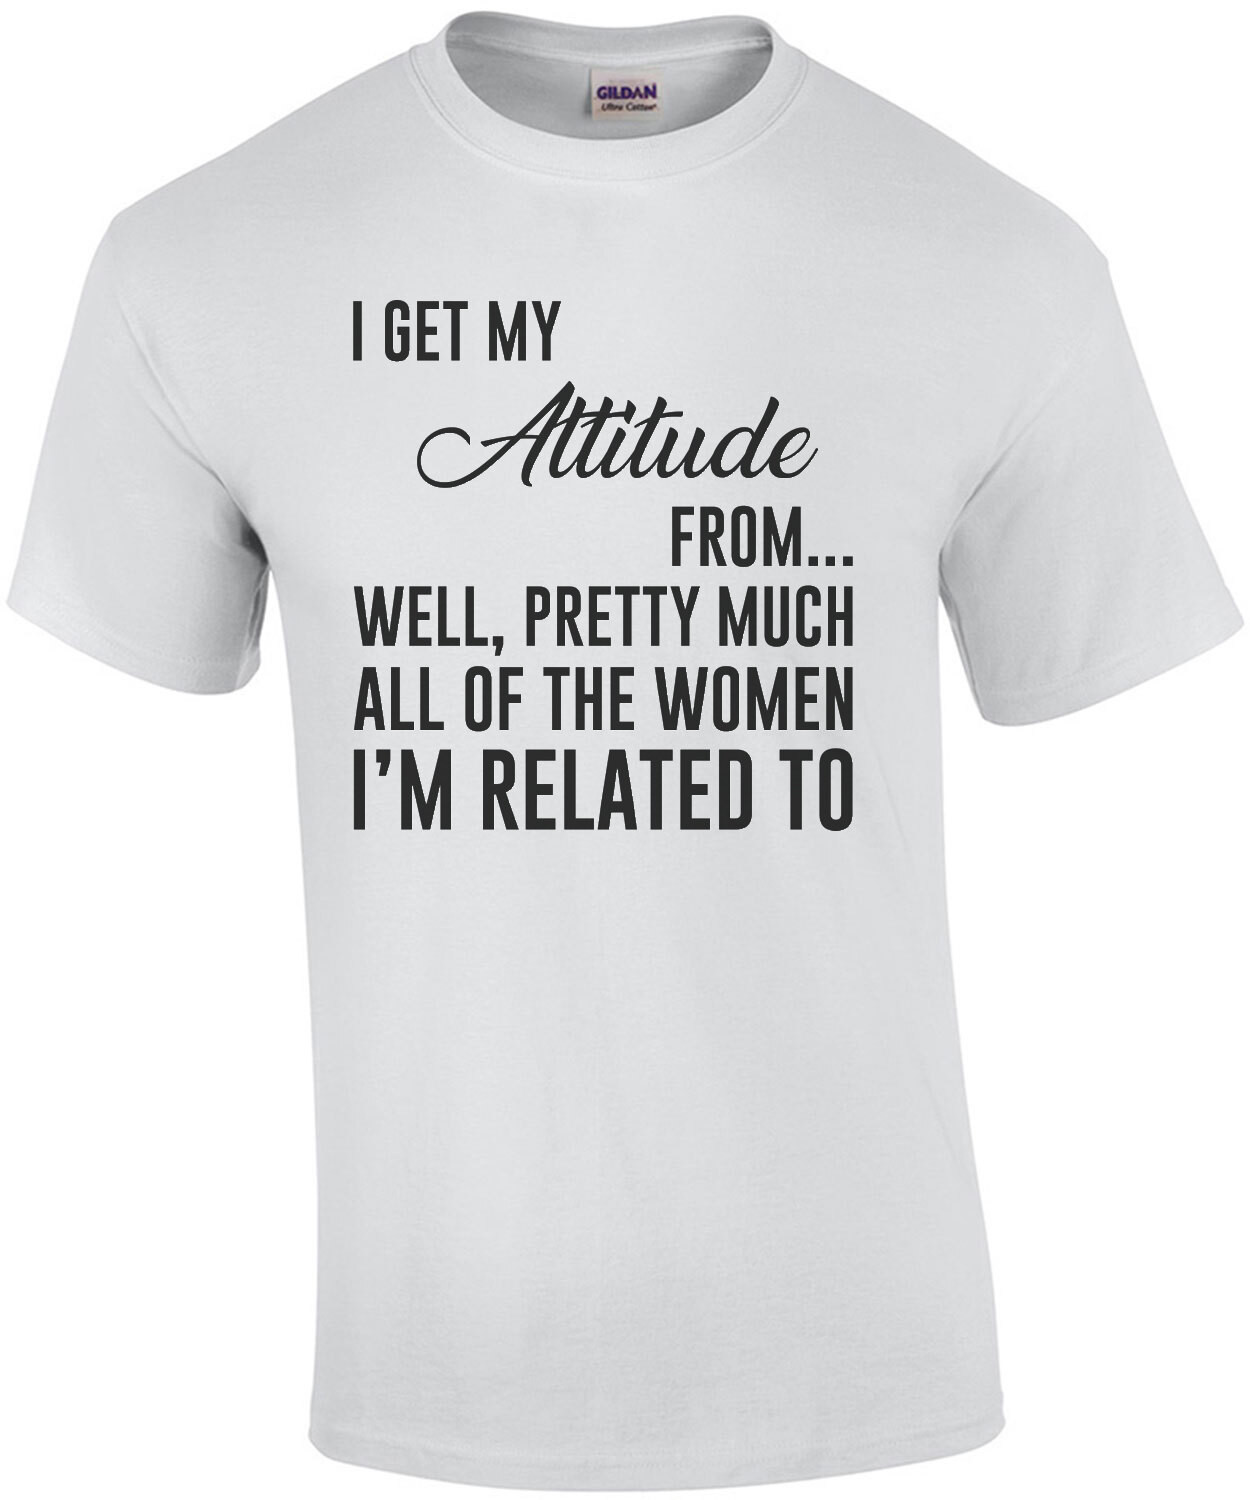 I get my attitude from... well, pretty much all of the women I'm related to - funny t-shirt